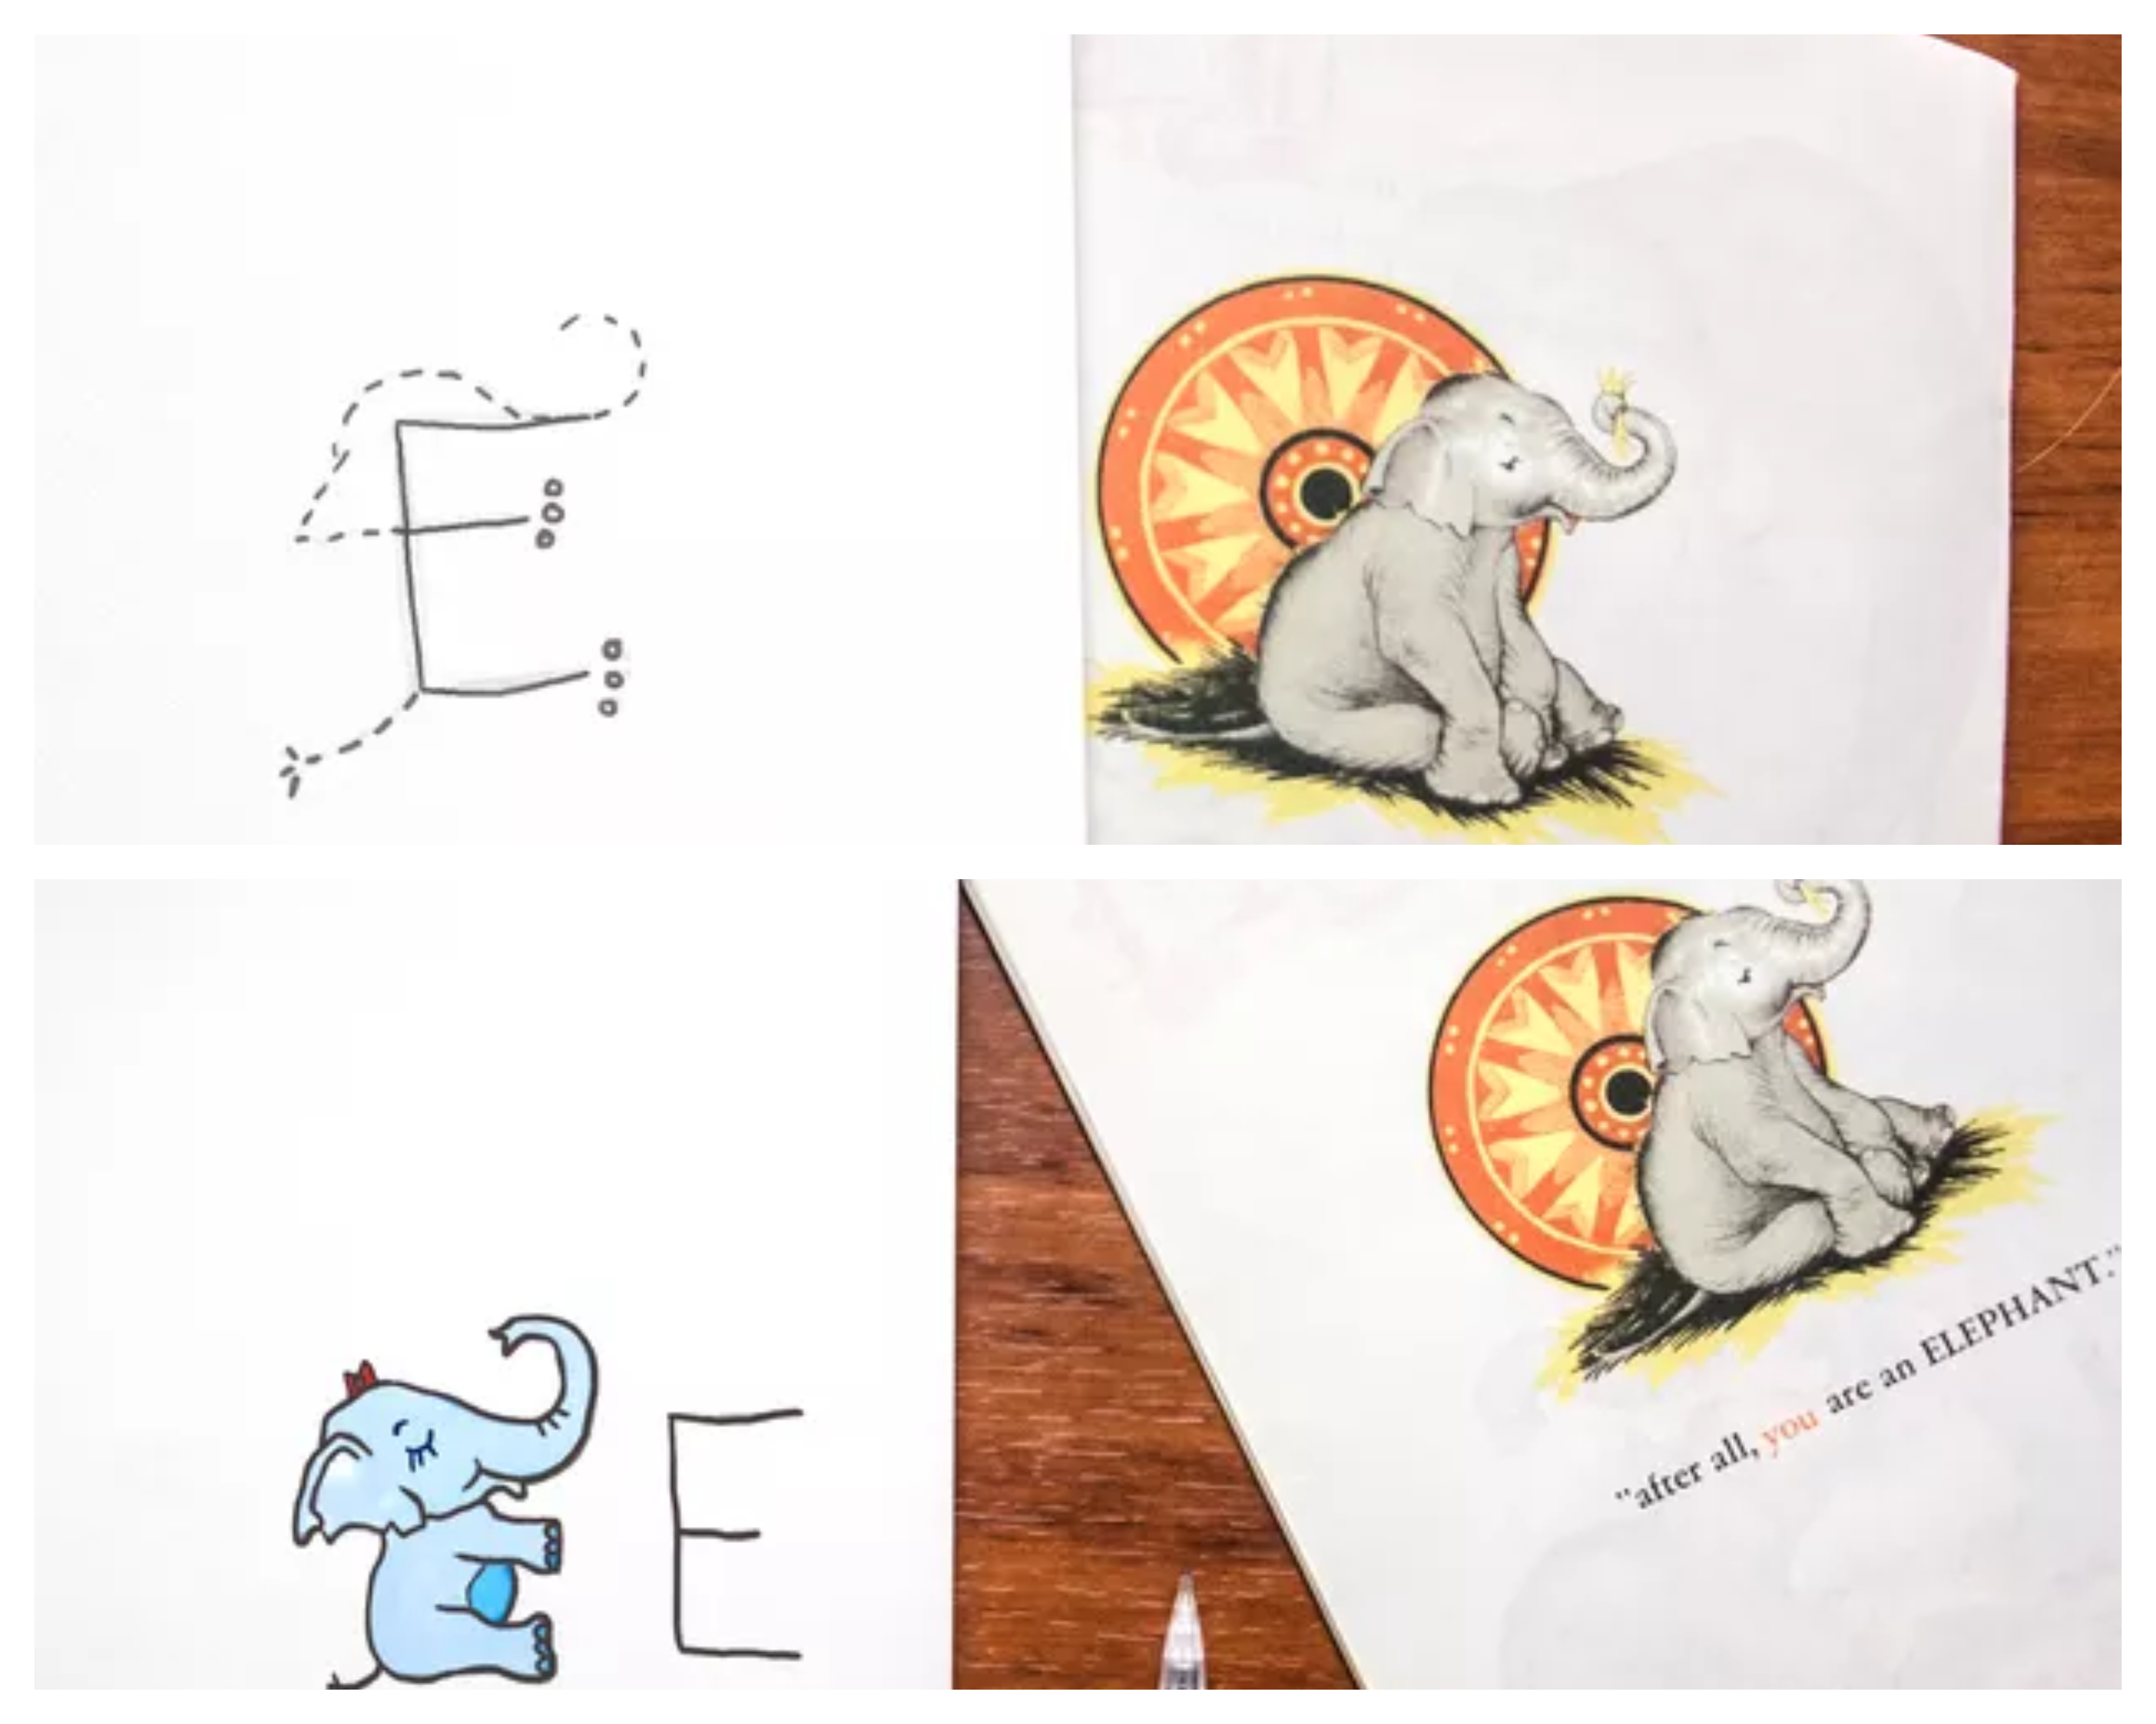 Letter E converted into an elephant drawing